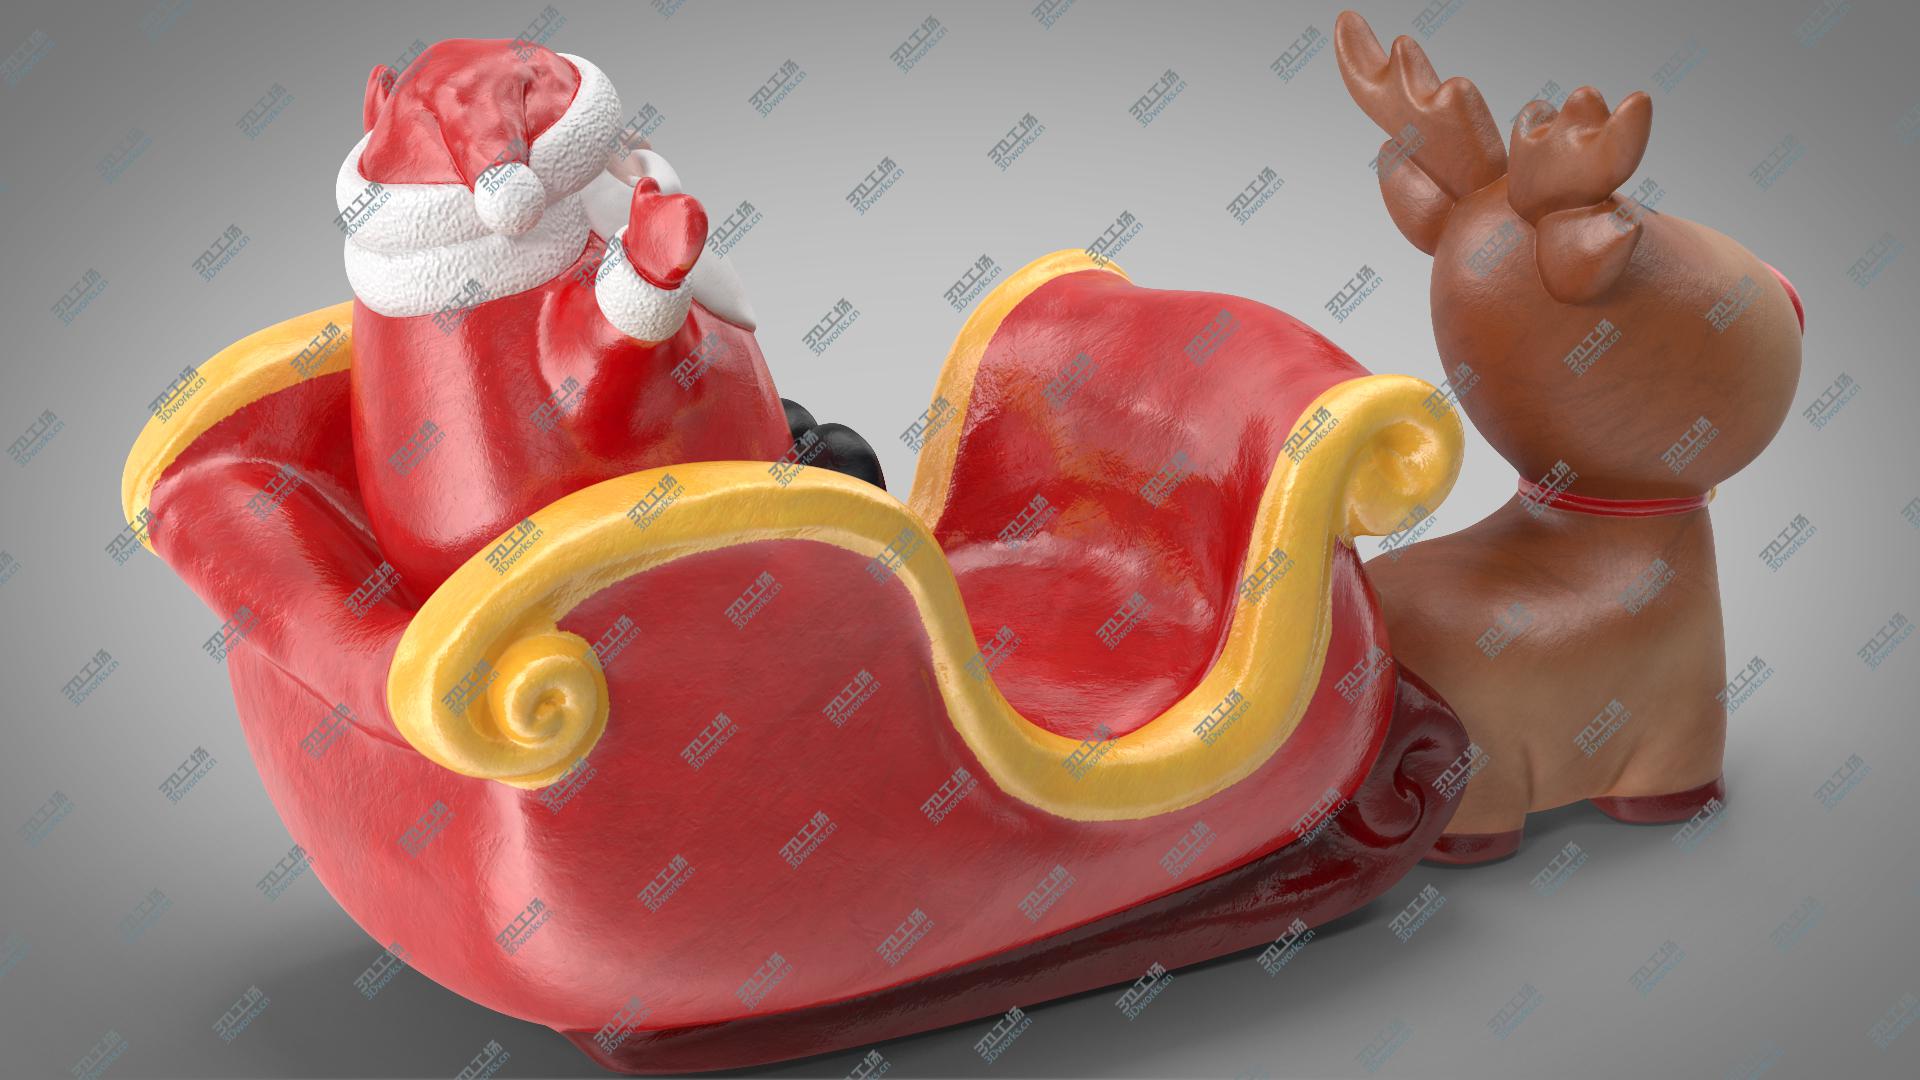 images/goods_img/202105071/Santa Claus with Sleigh Decorative Figurine 2 3D model/4.jpg